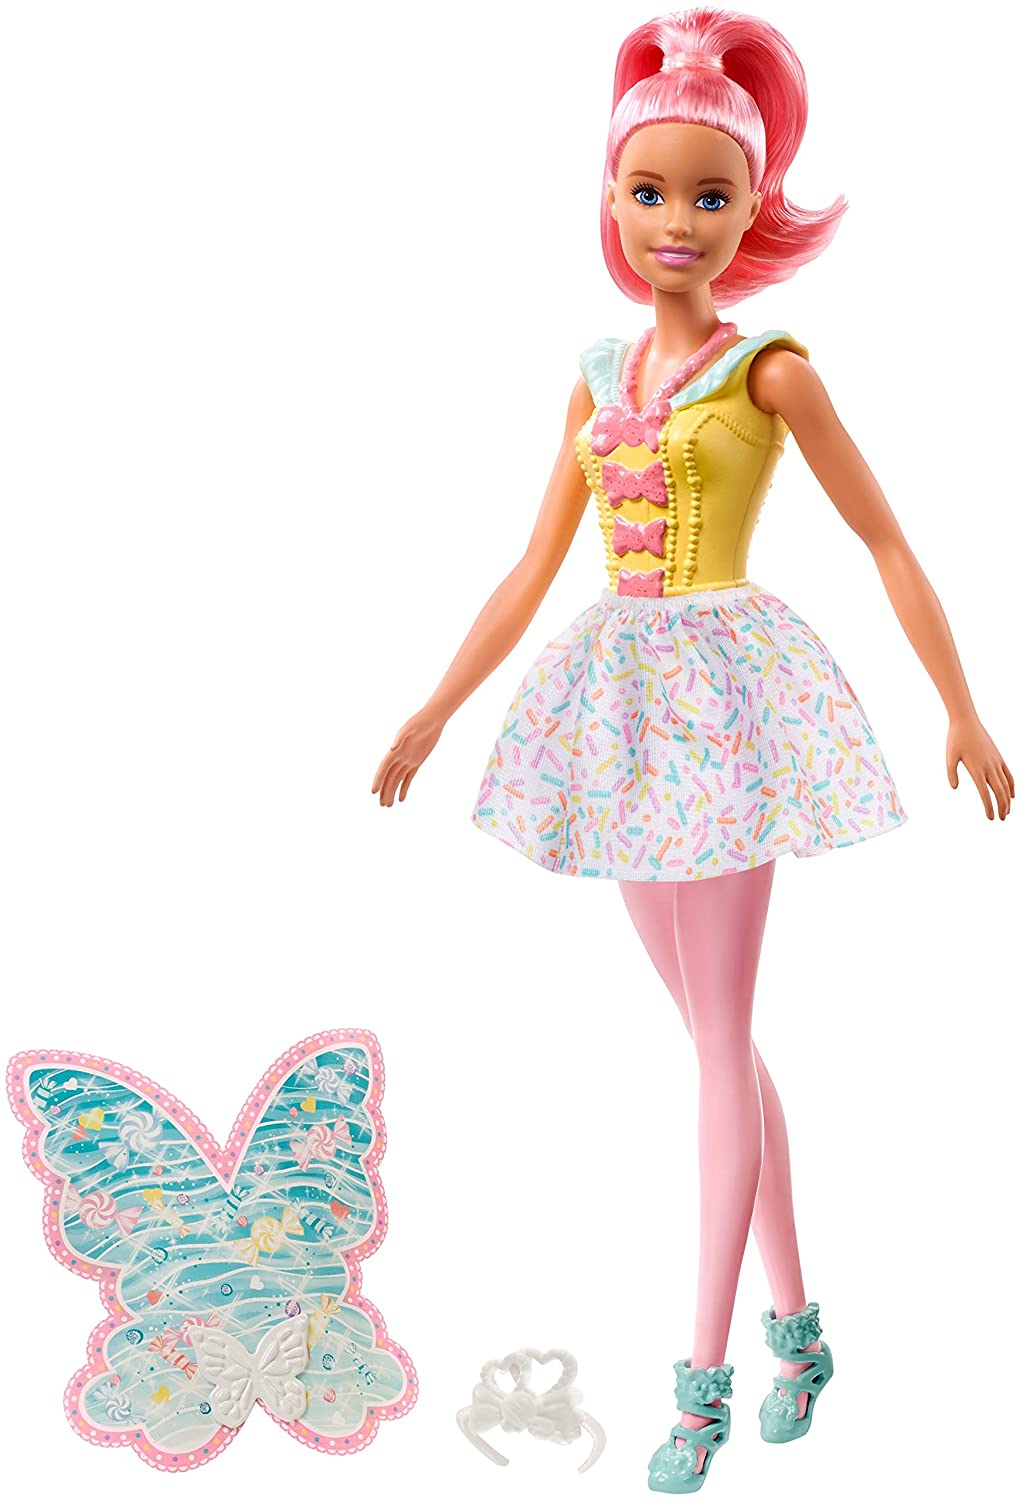 Barbie Dreamtopia Fairy Doll, Pink Hair & Candy-Decorated Wings - image 1 of 8